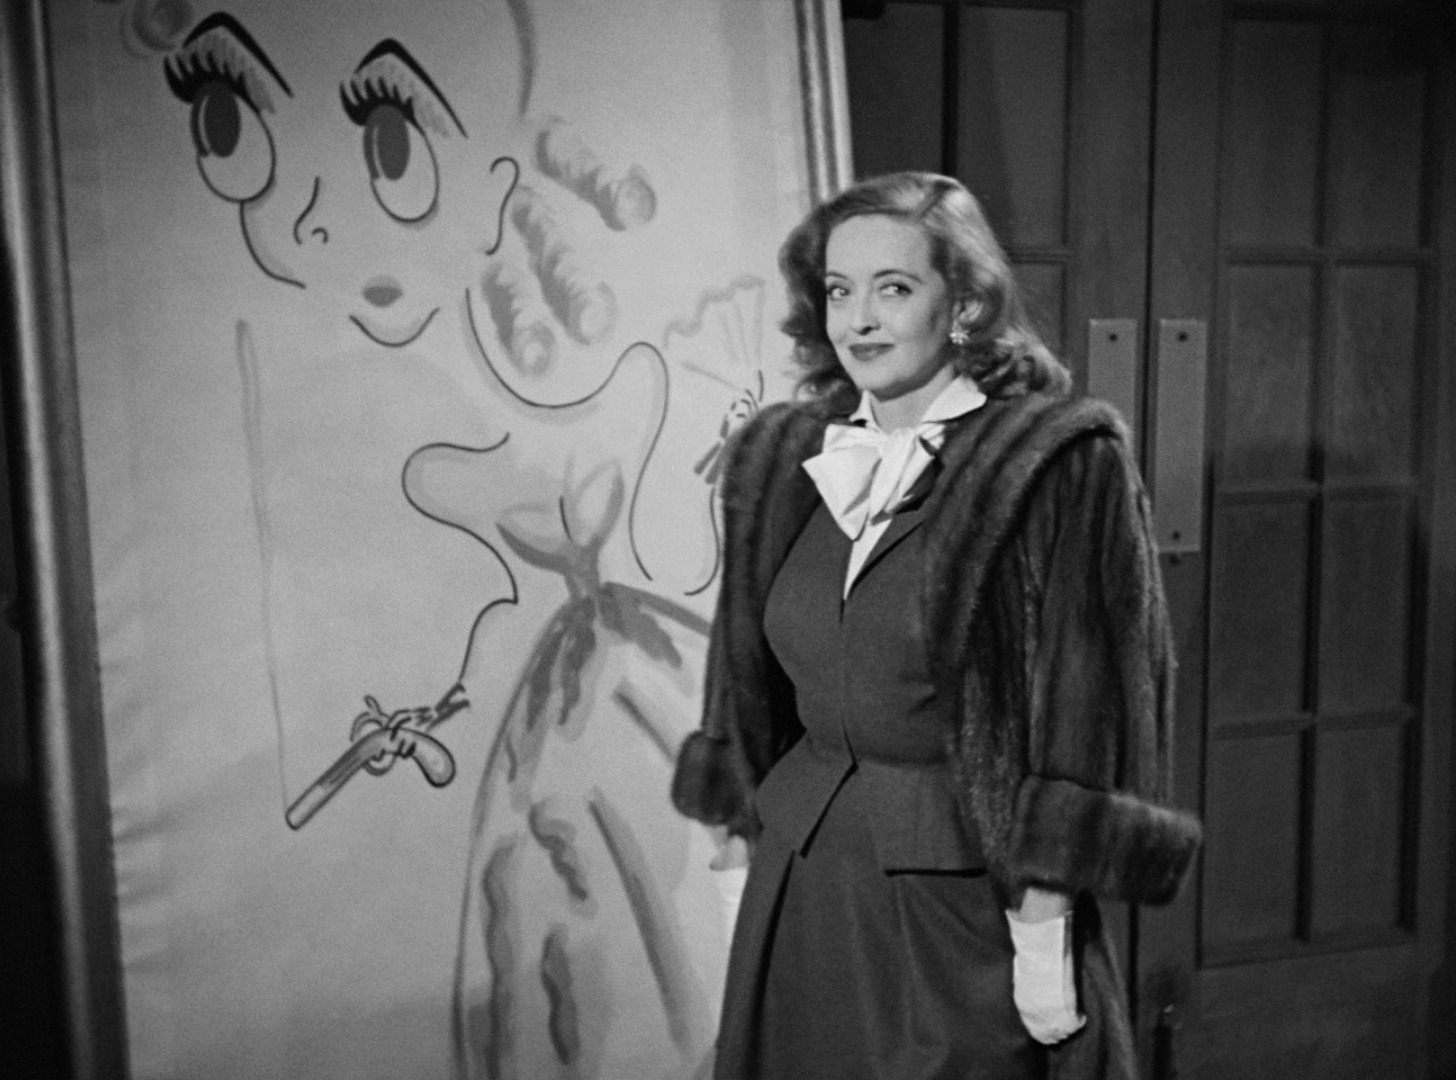 ALL ABOUT EVE (1950)